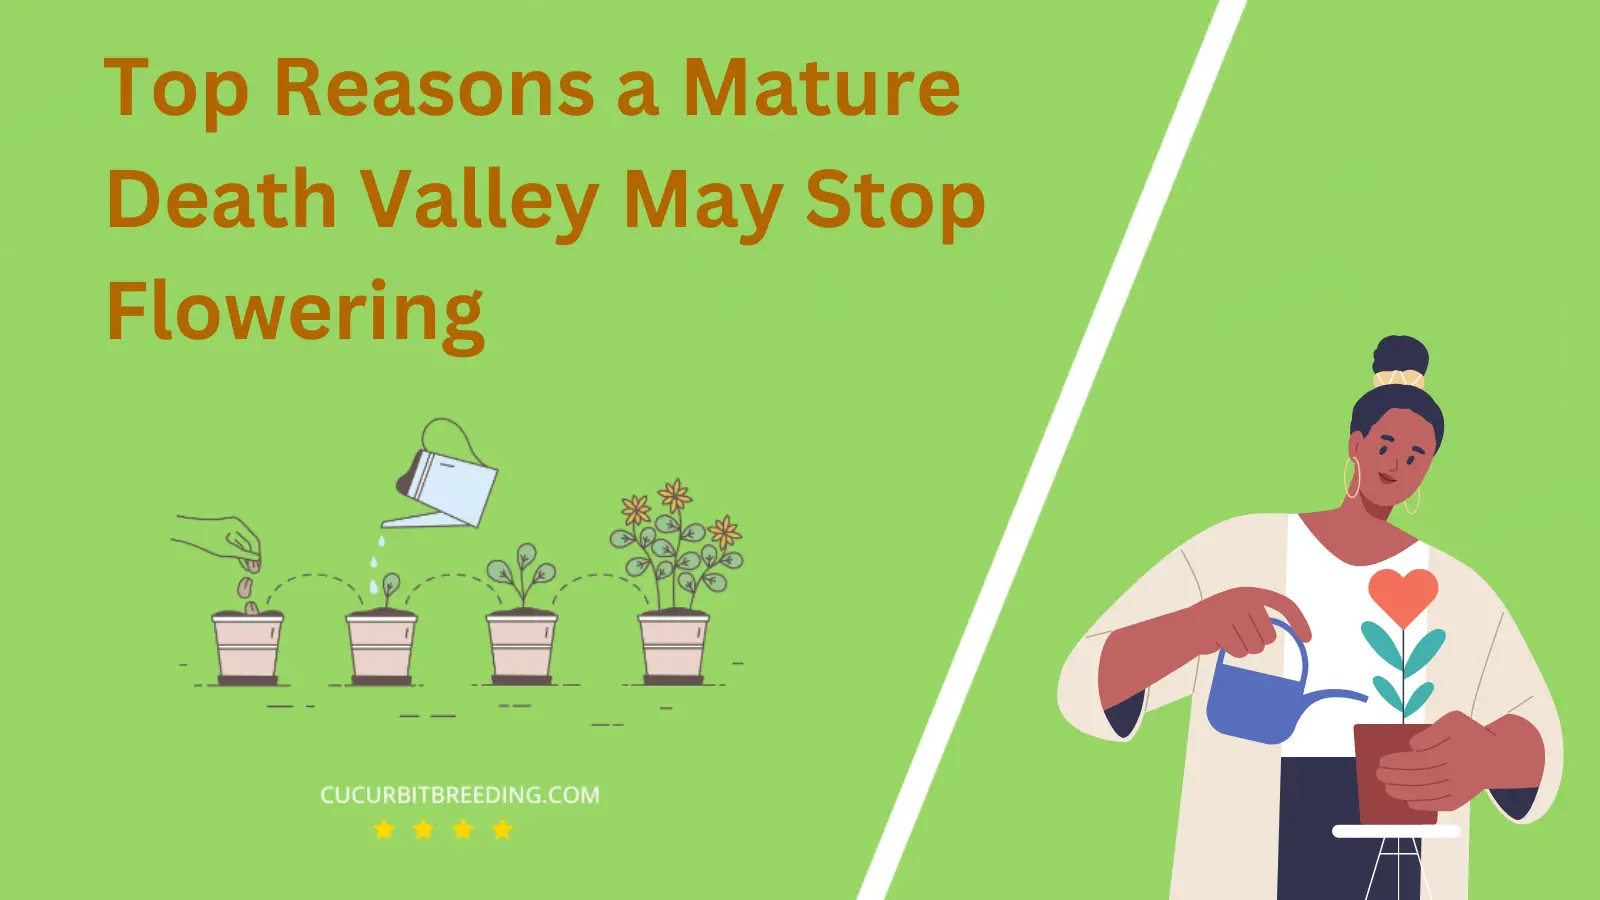 Top Reasons a Mature Death Valley May Stop Flowering